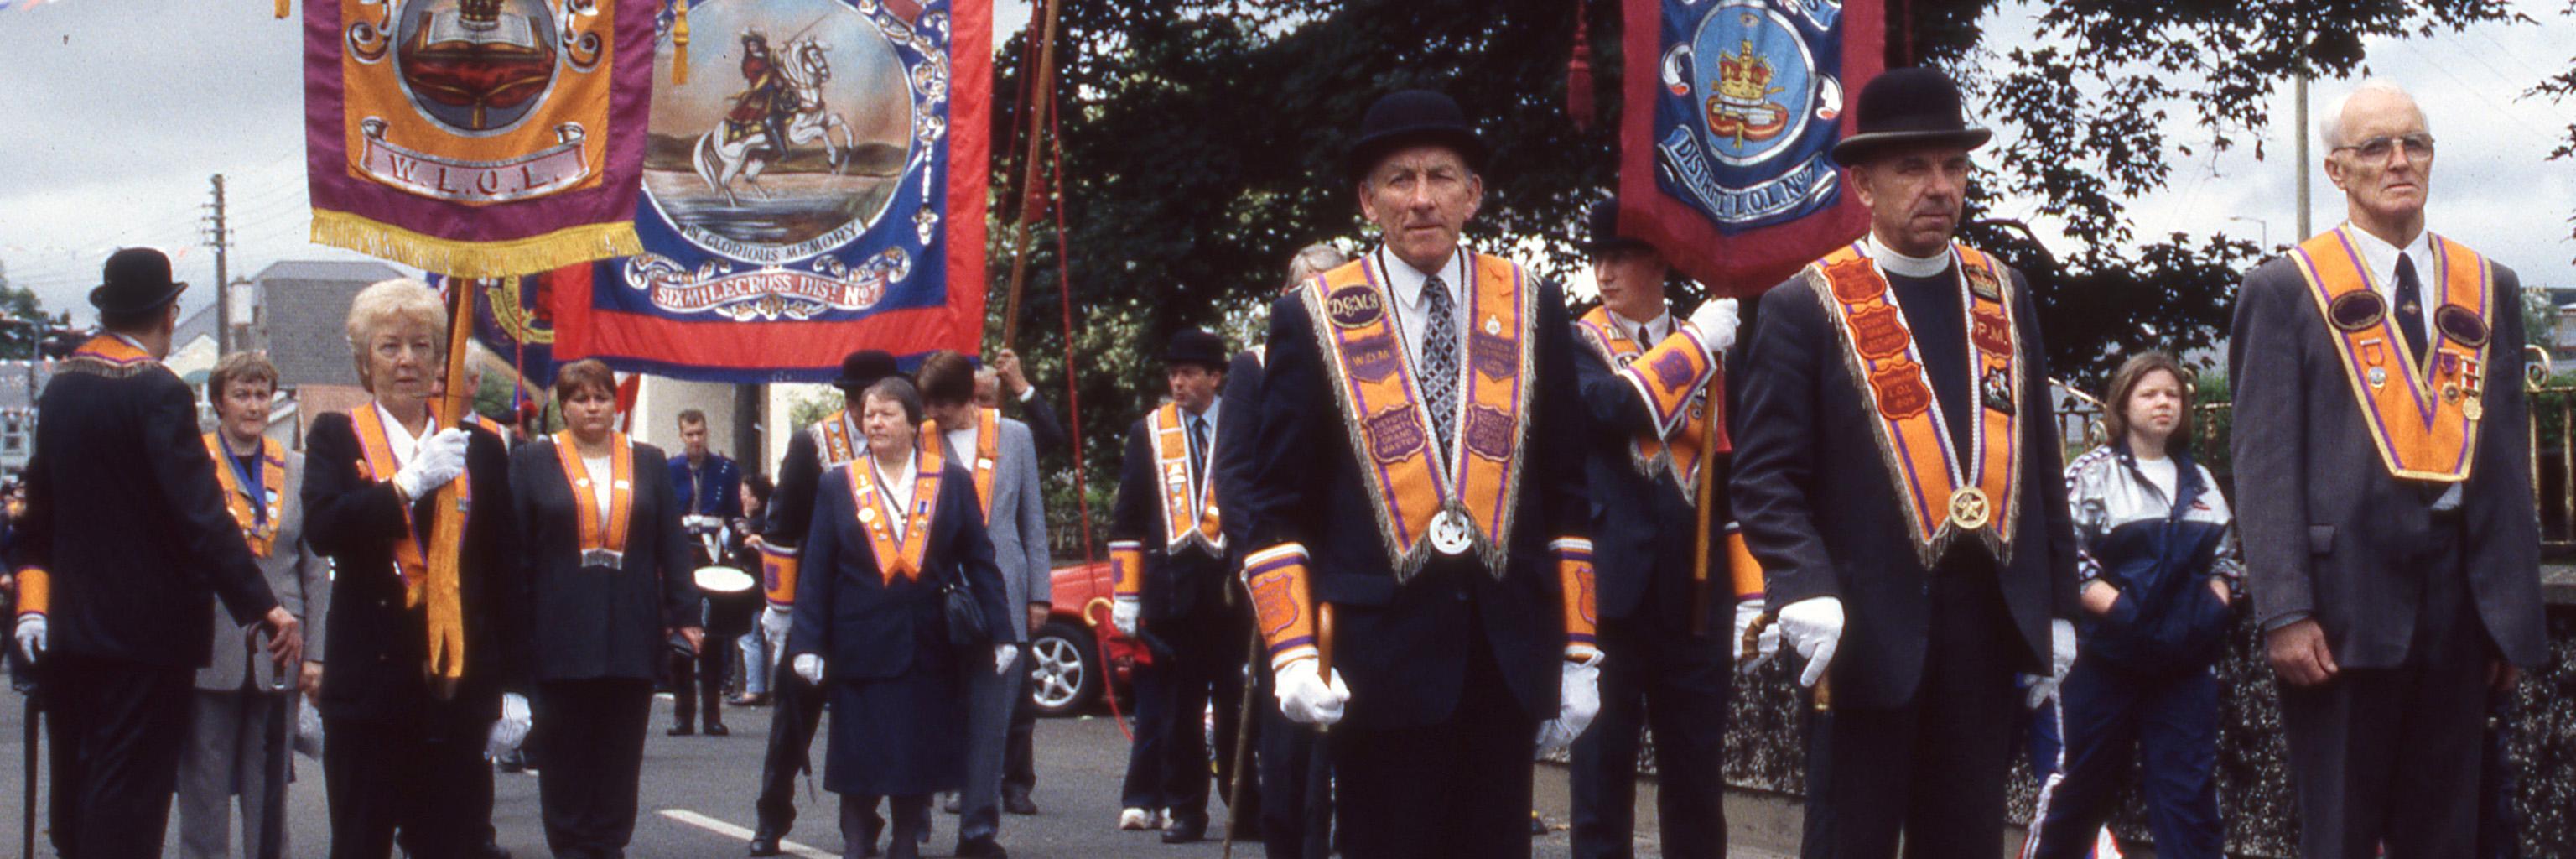 Image of people marching in a parade.